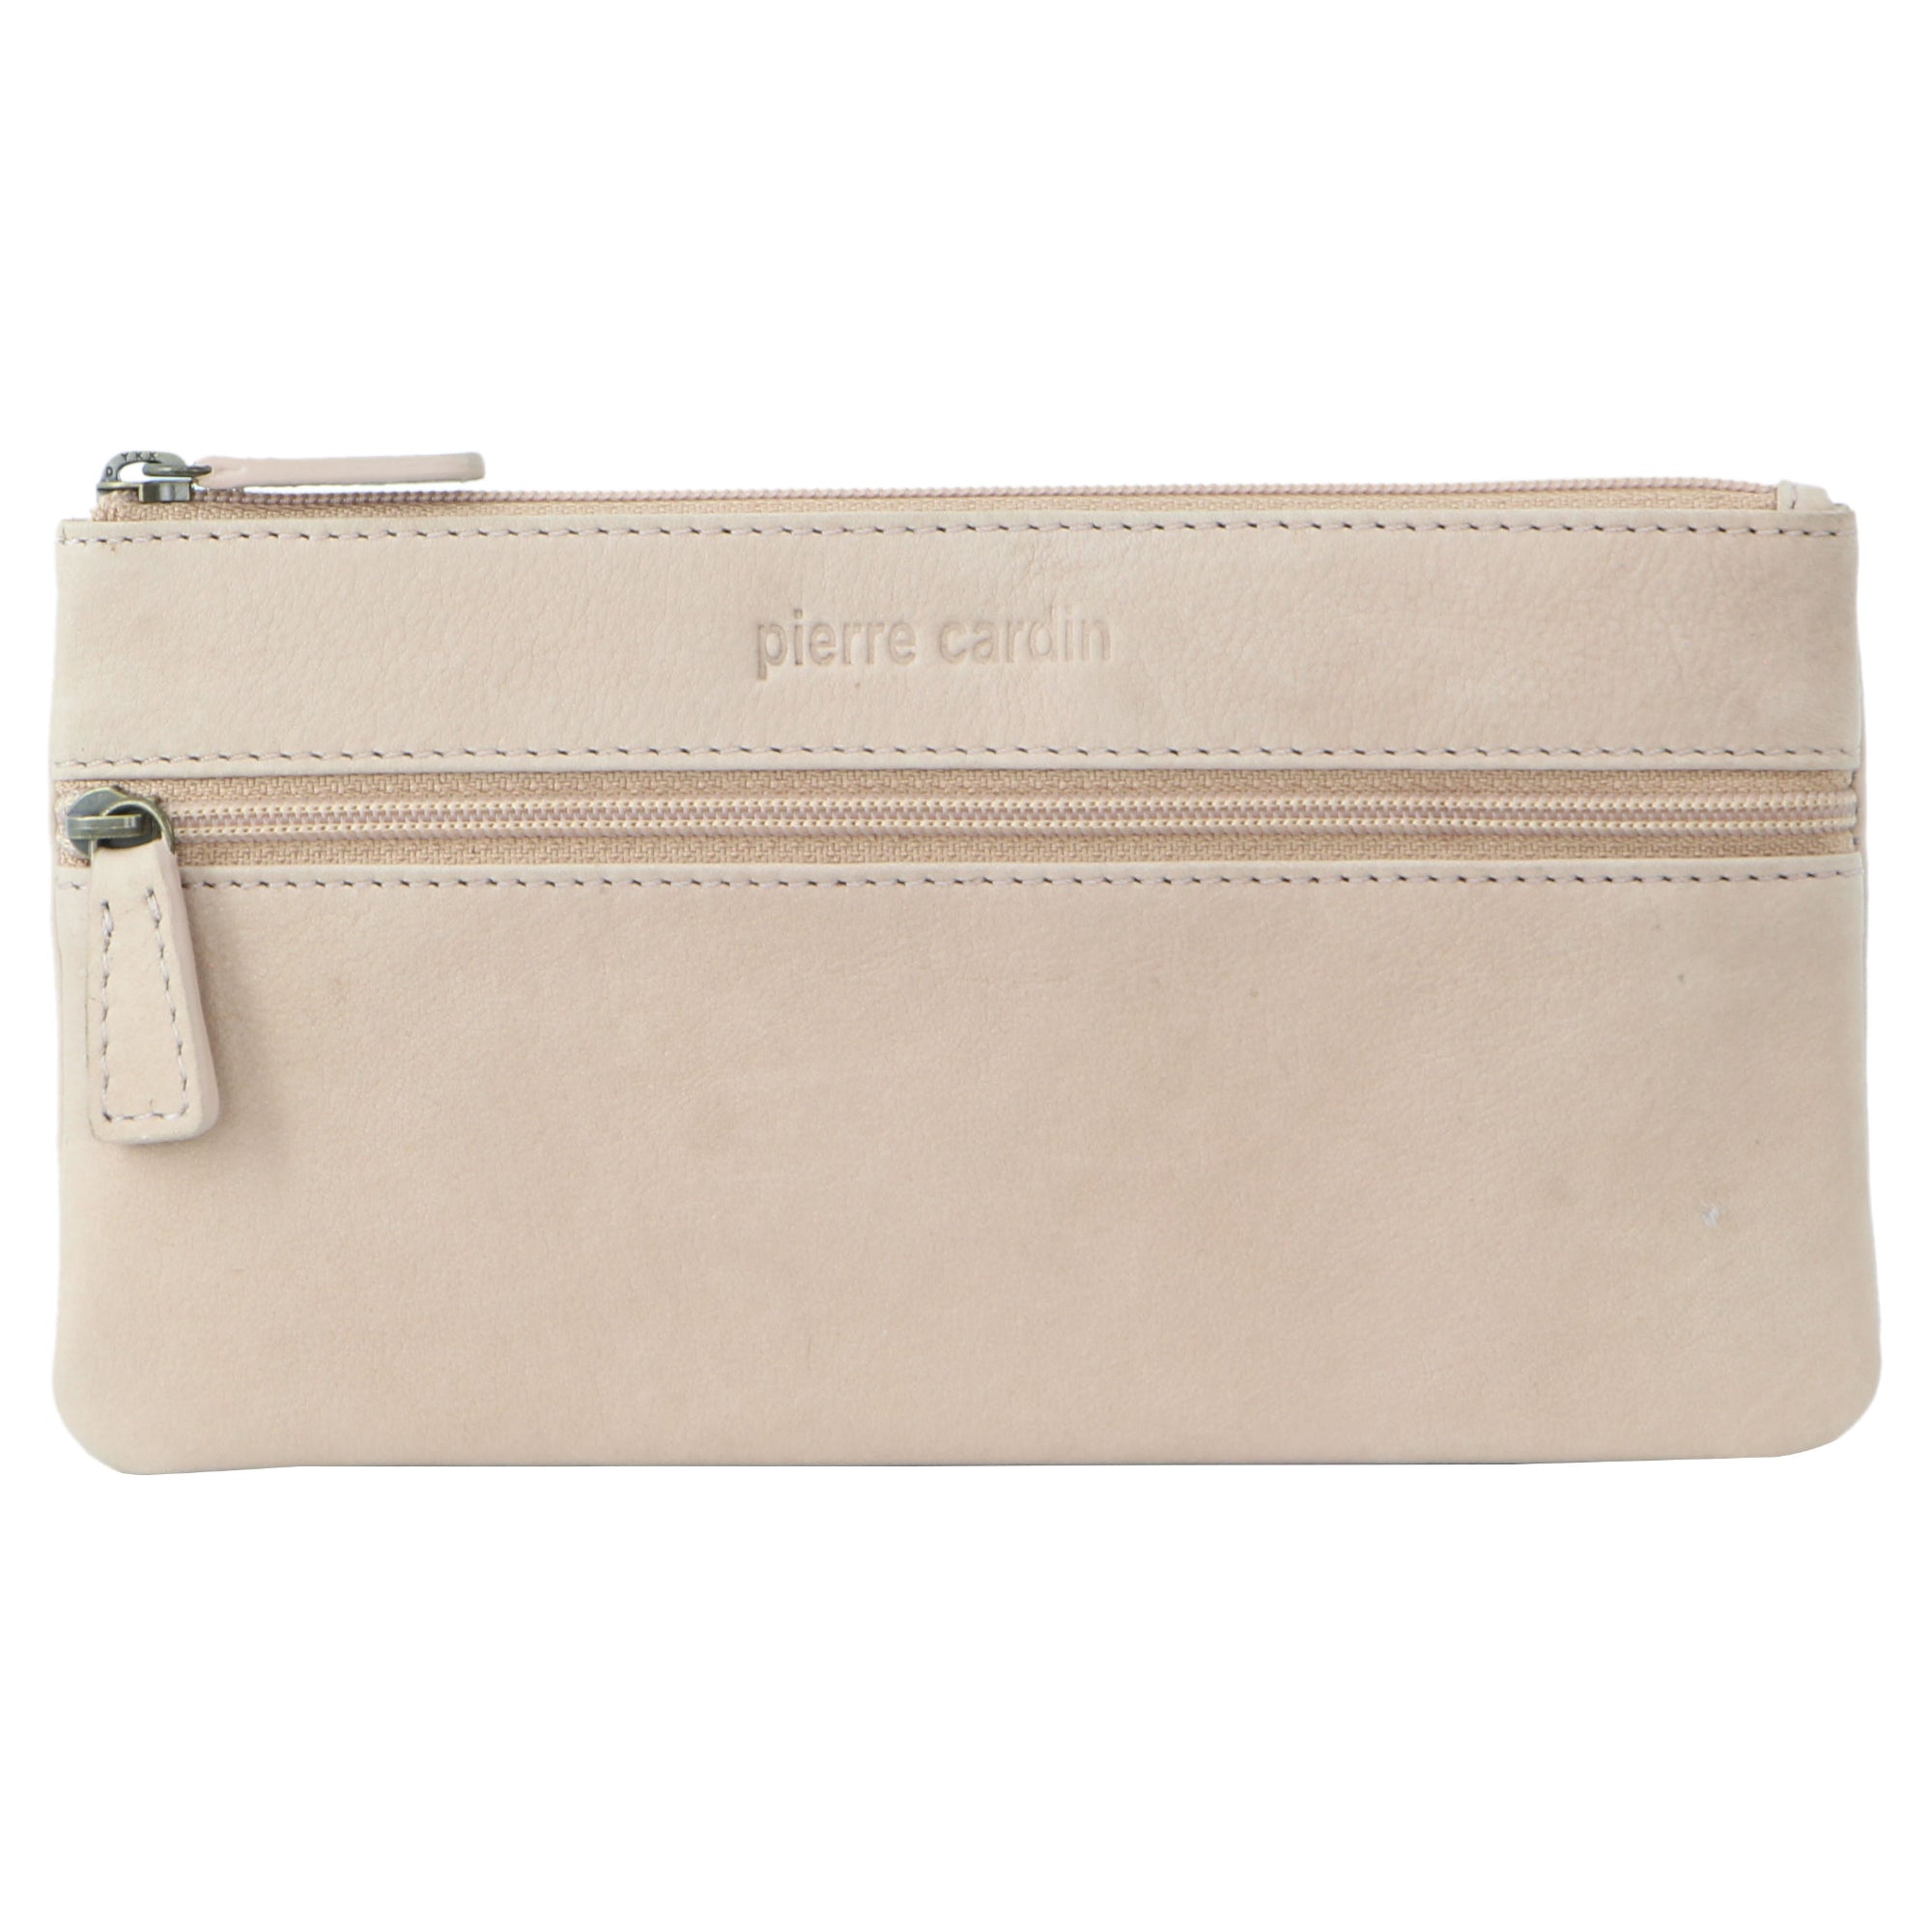 Pierre Cardin Leather Coin Purse/Phone Wallet Case in Pearl